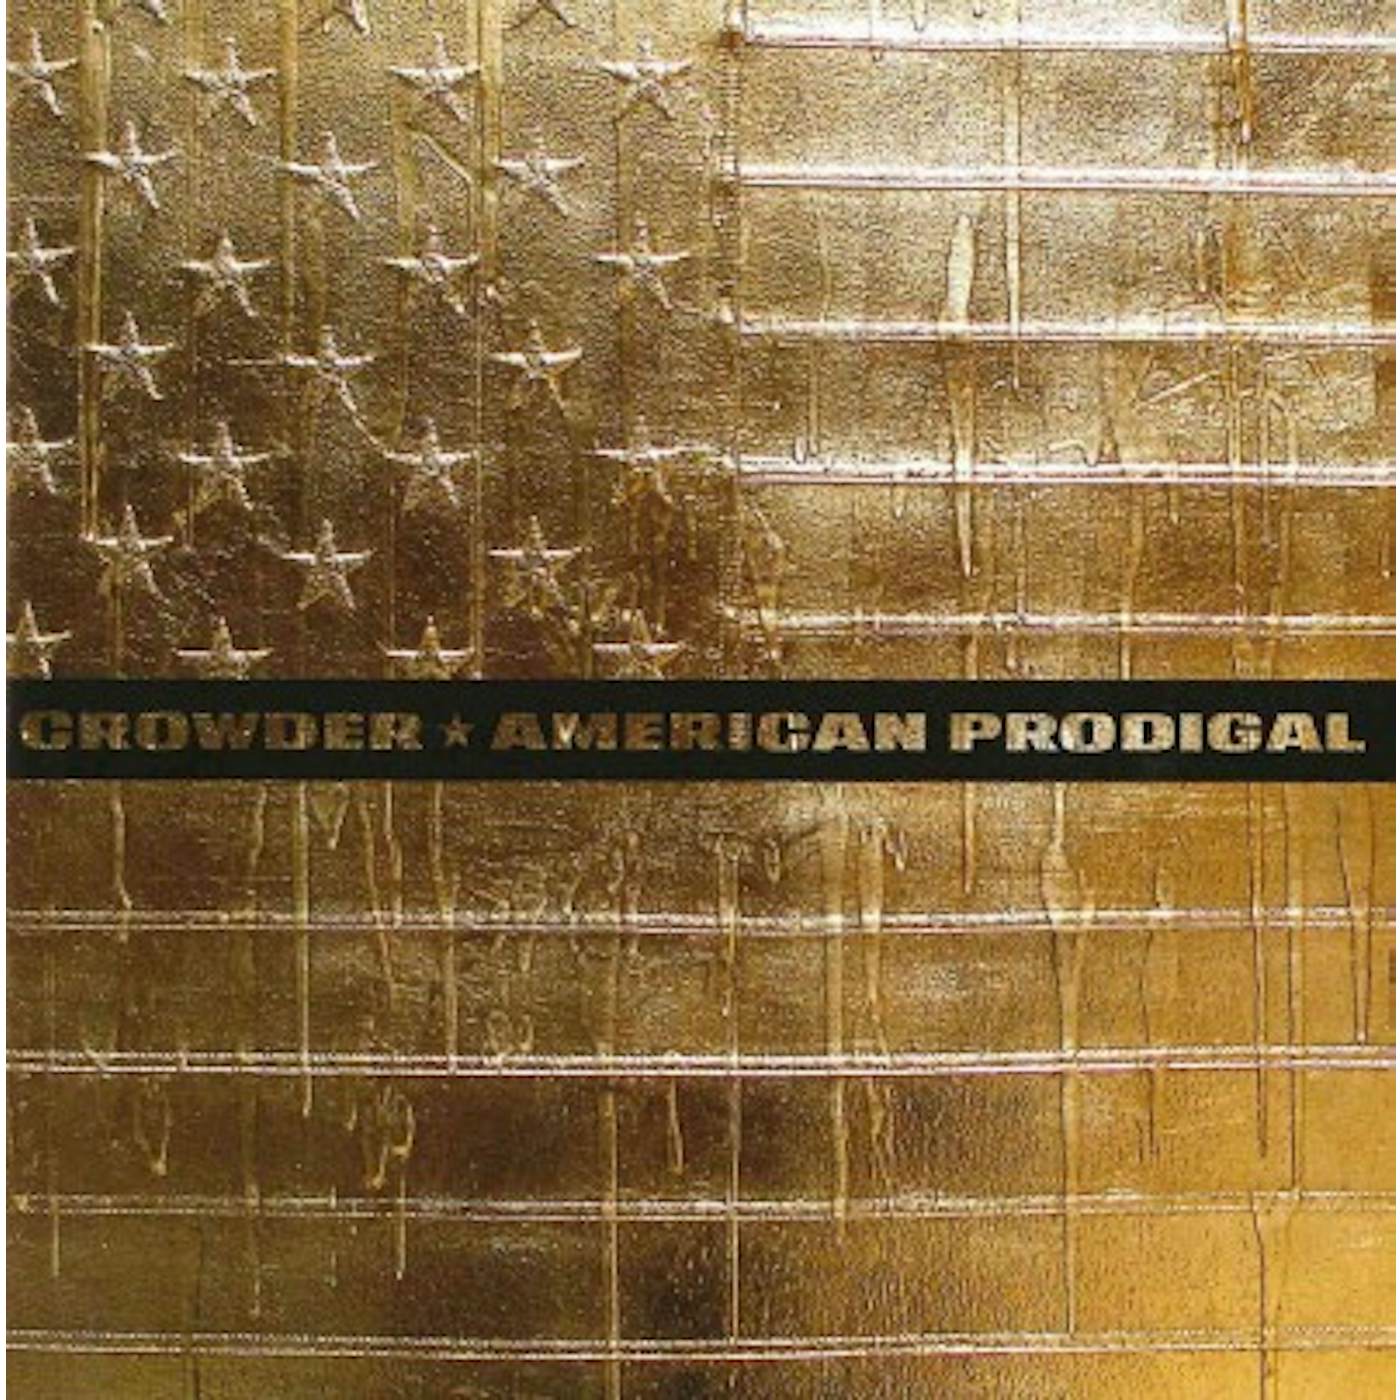 Crowder AMERICAN PRODIGAL (DELUXE) CD